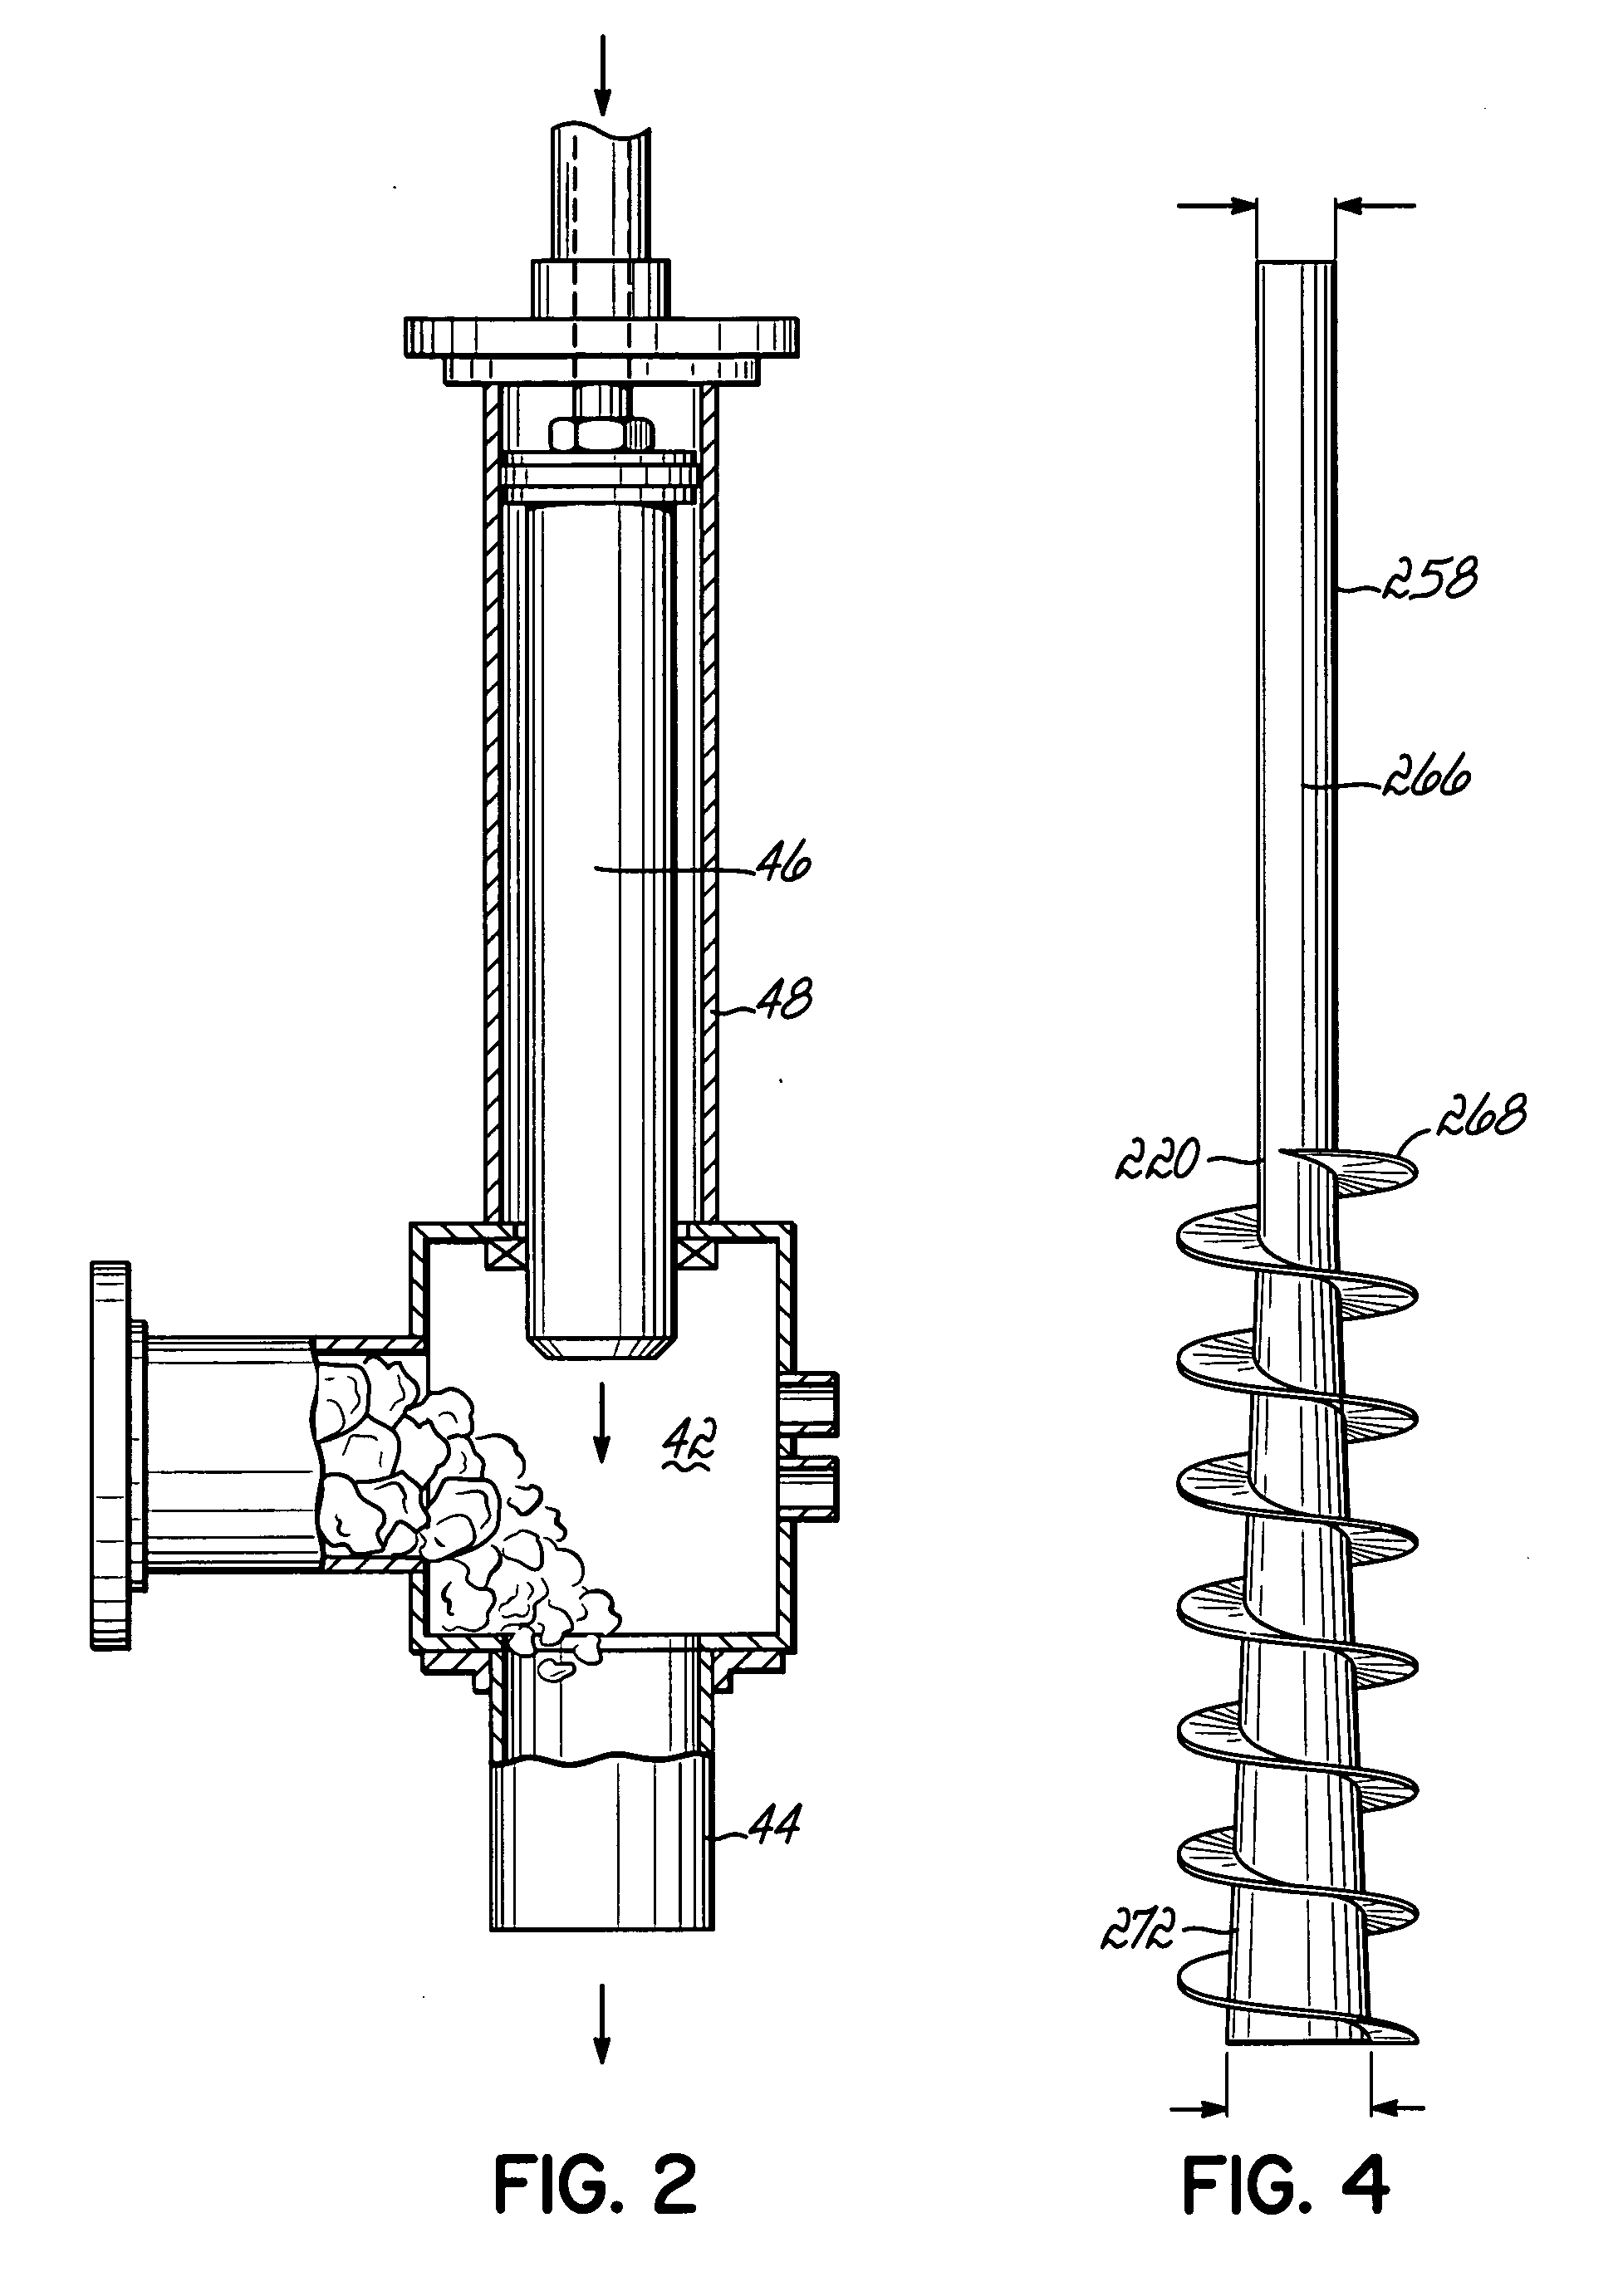 Method and apparatus for producing synthesis gas from waste materials